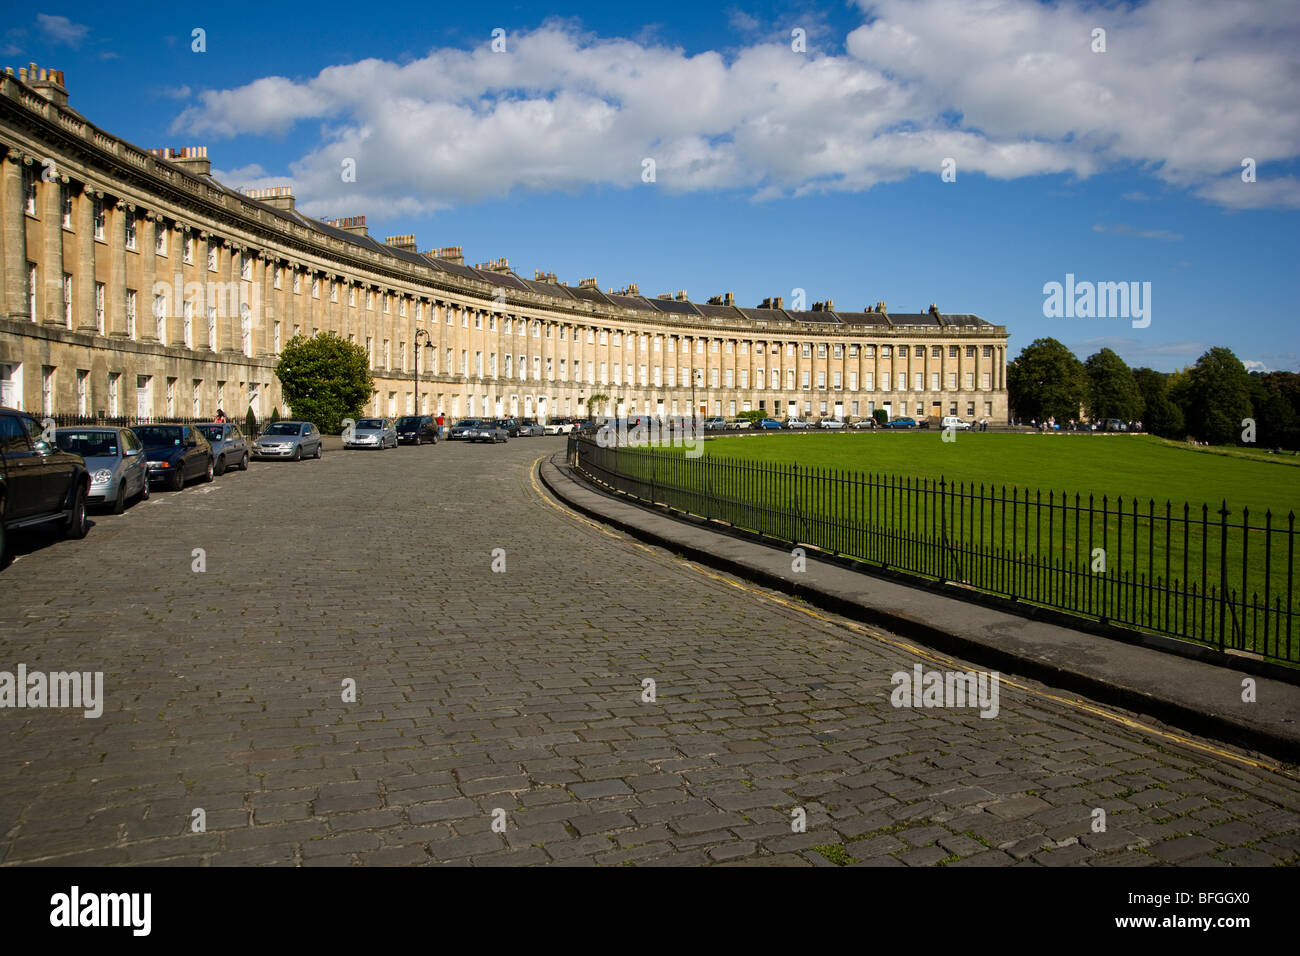 Historic terraced houses in The Royal Crescent, World Heritage City, Bath, Somerset, England, UK, Stock Photo